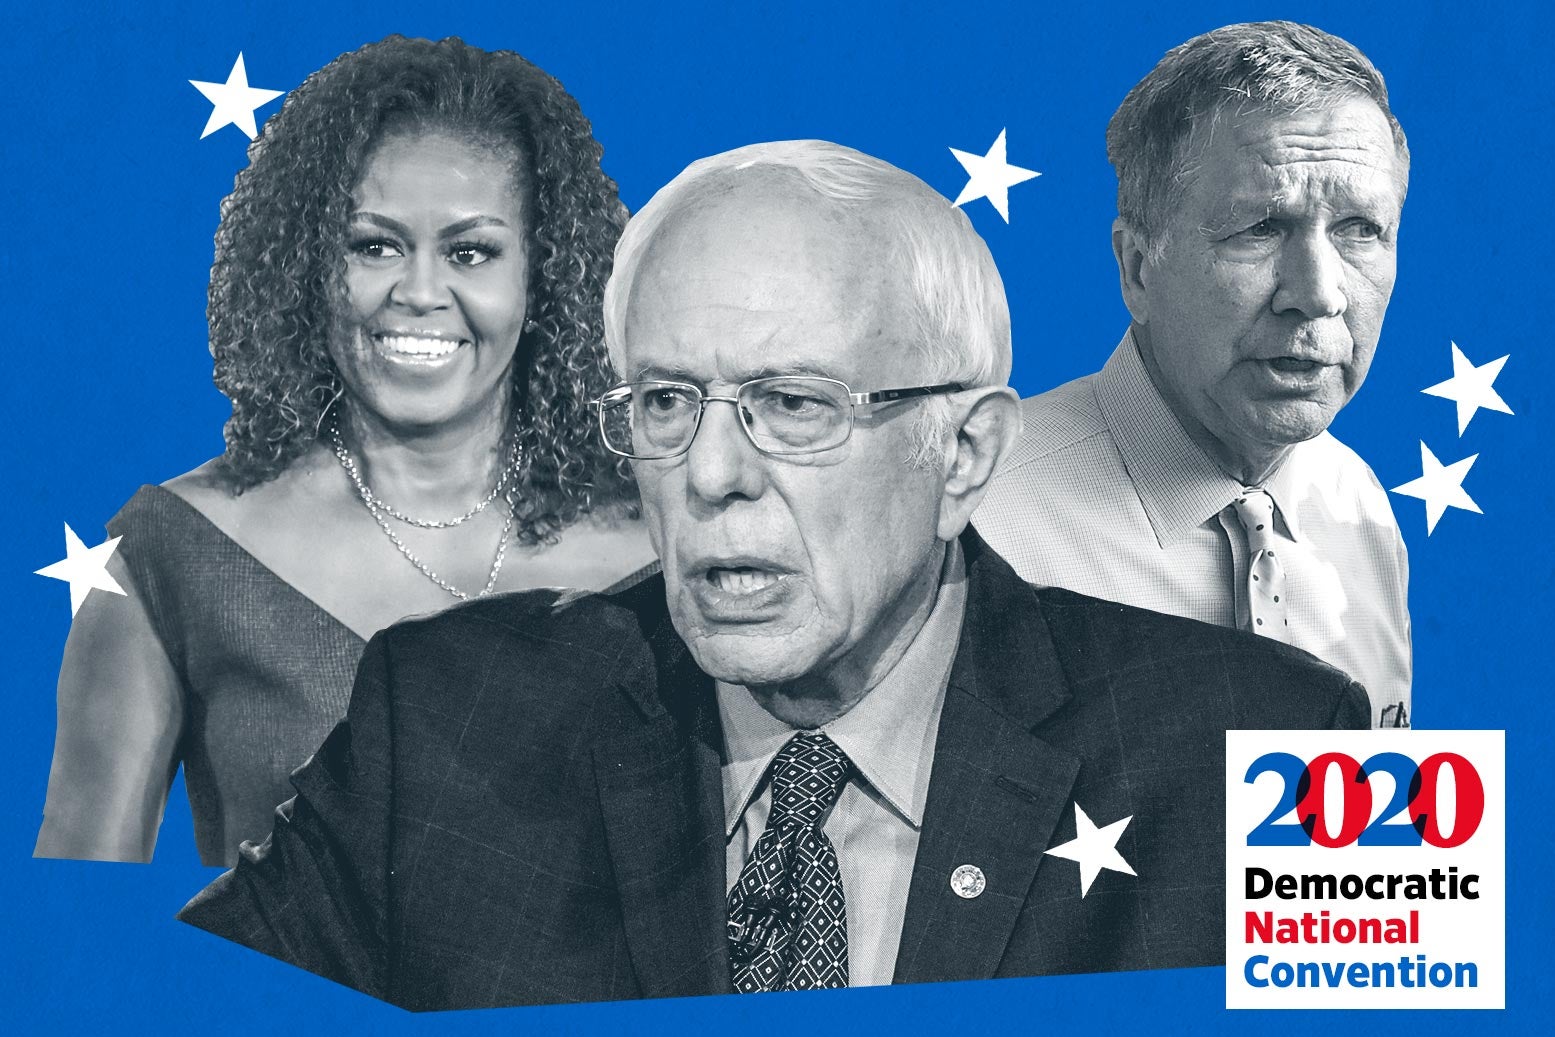 Michelle Obama, Bernie Sanders, and John Kasich surrounded by stars on a blue background.